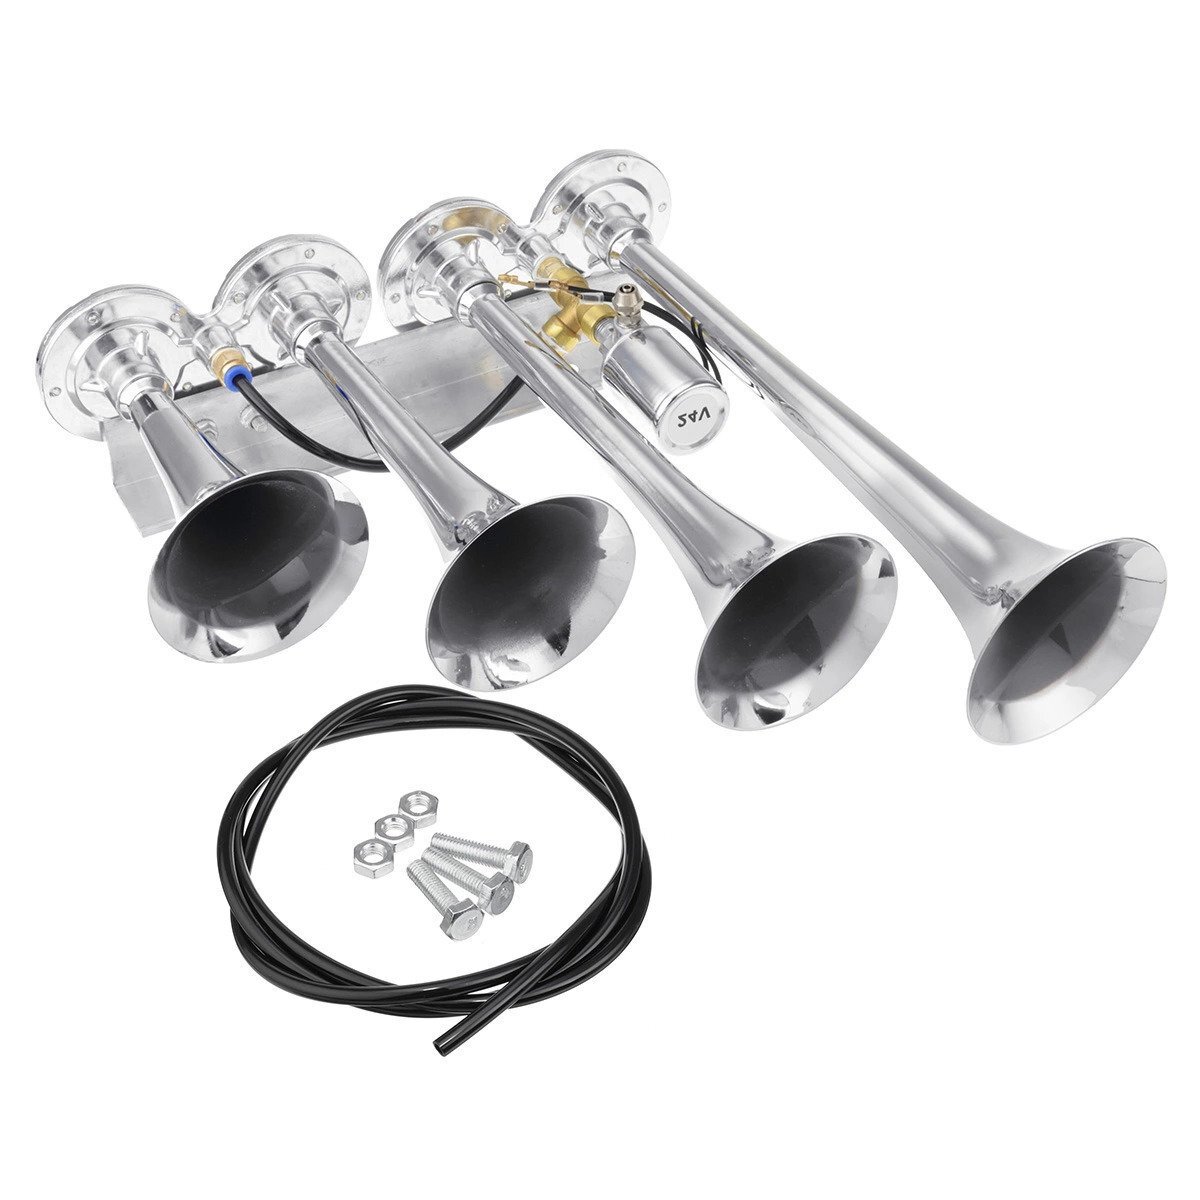  title 4 trumpet air horn 12/24V car vehicle for truck to Rainbow to motorcycle multi tone &claxon horn [ is possible to choose 2 pattern number / color ]